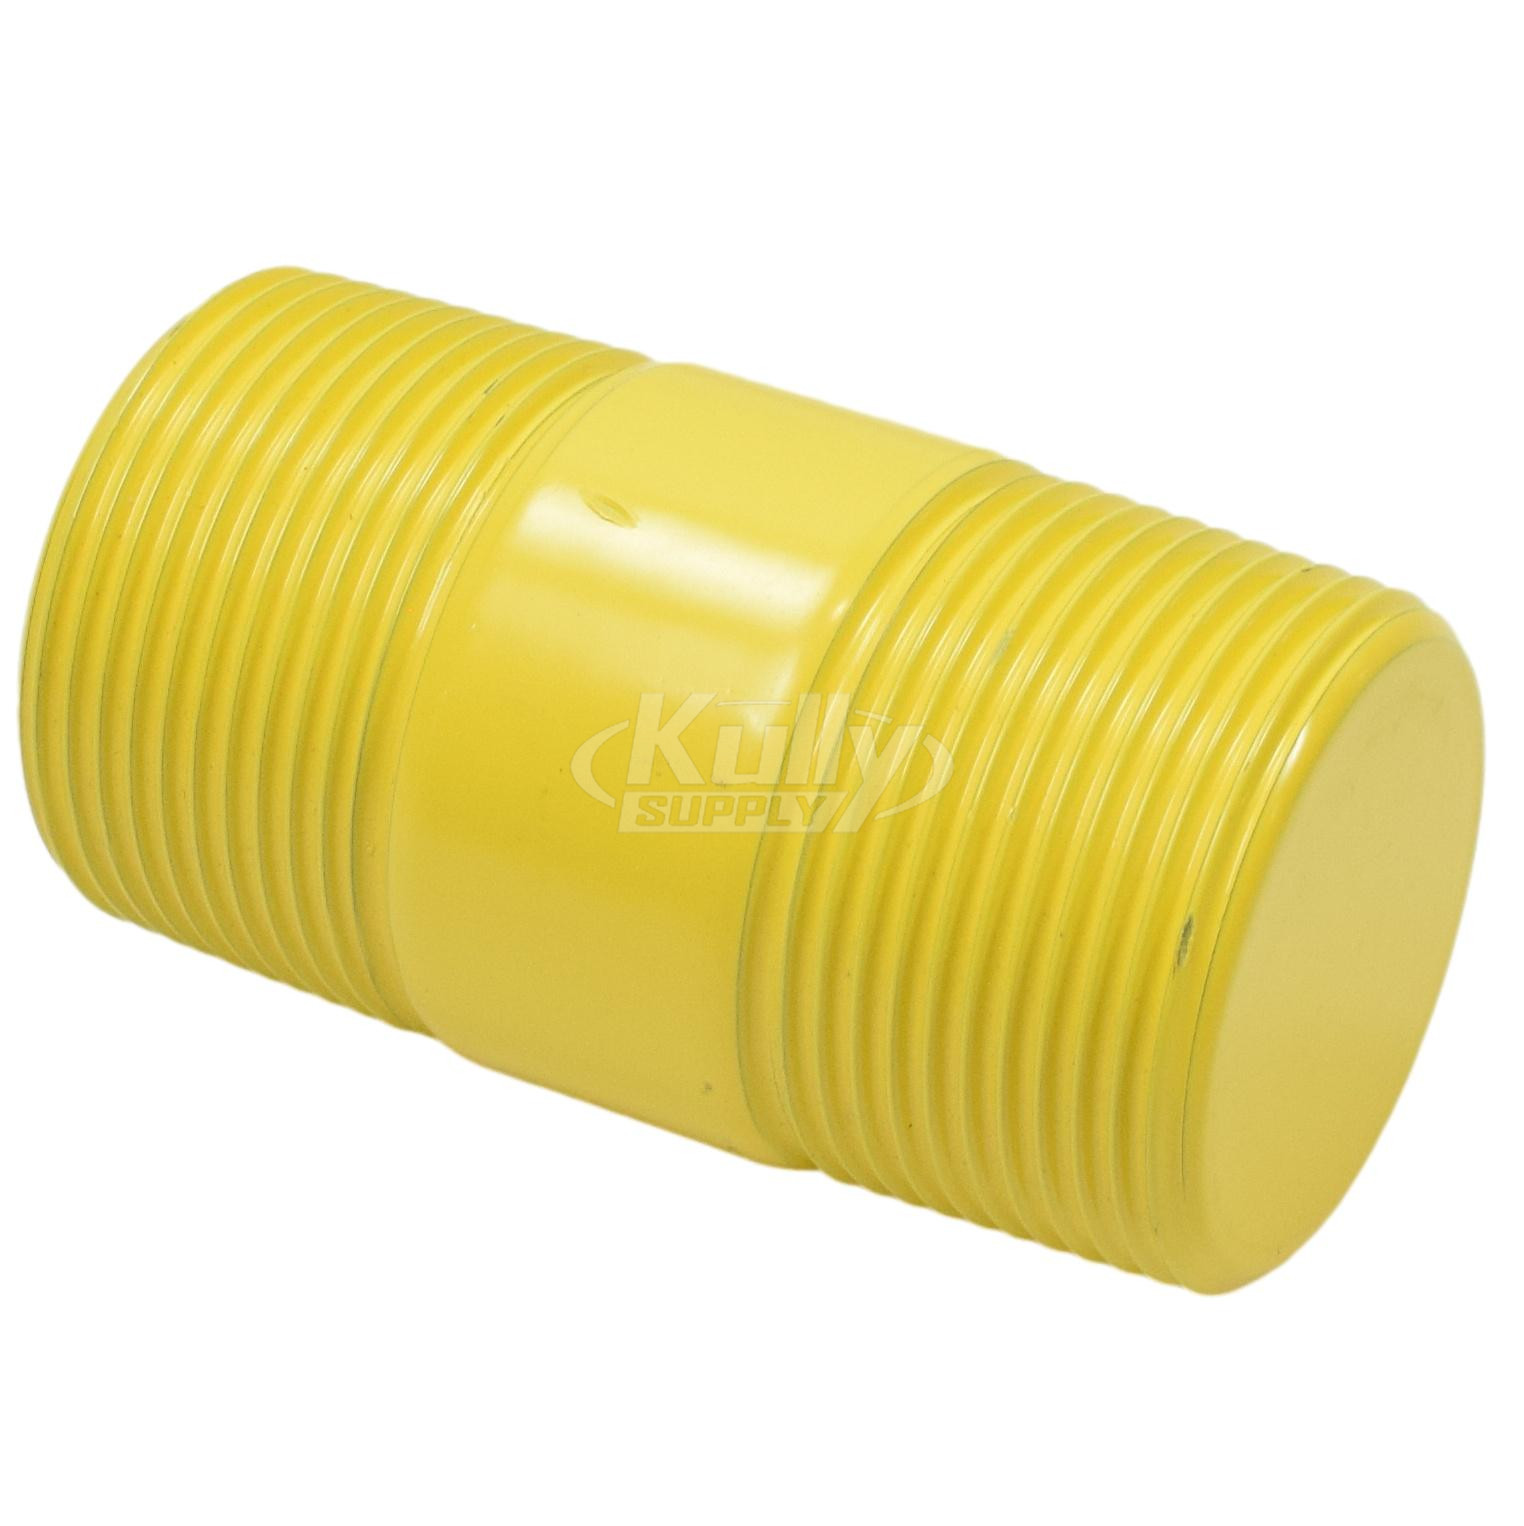 Bradley S06-136 Painted Solid Pipe 1-1/4" x 3"